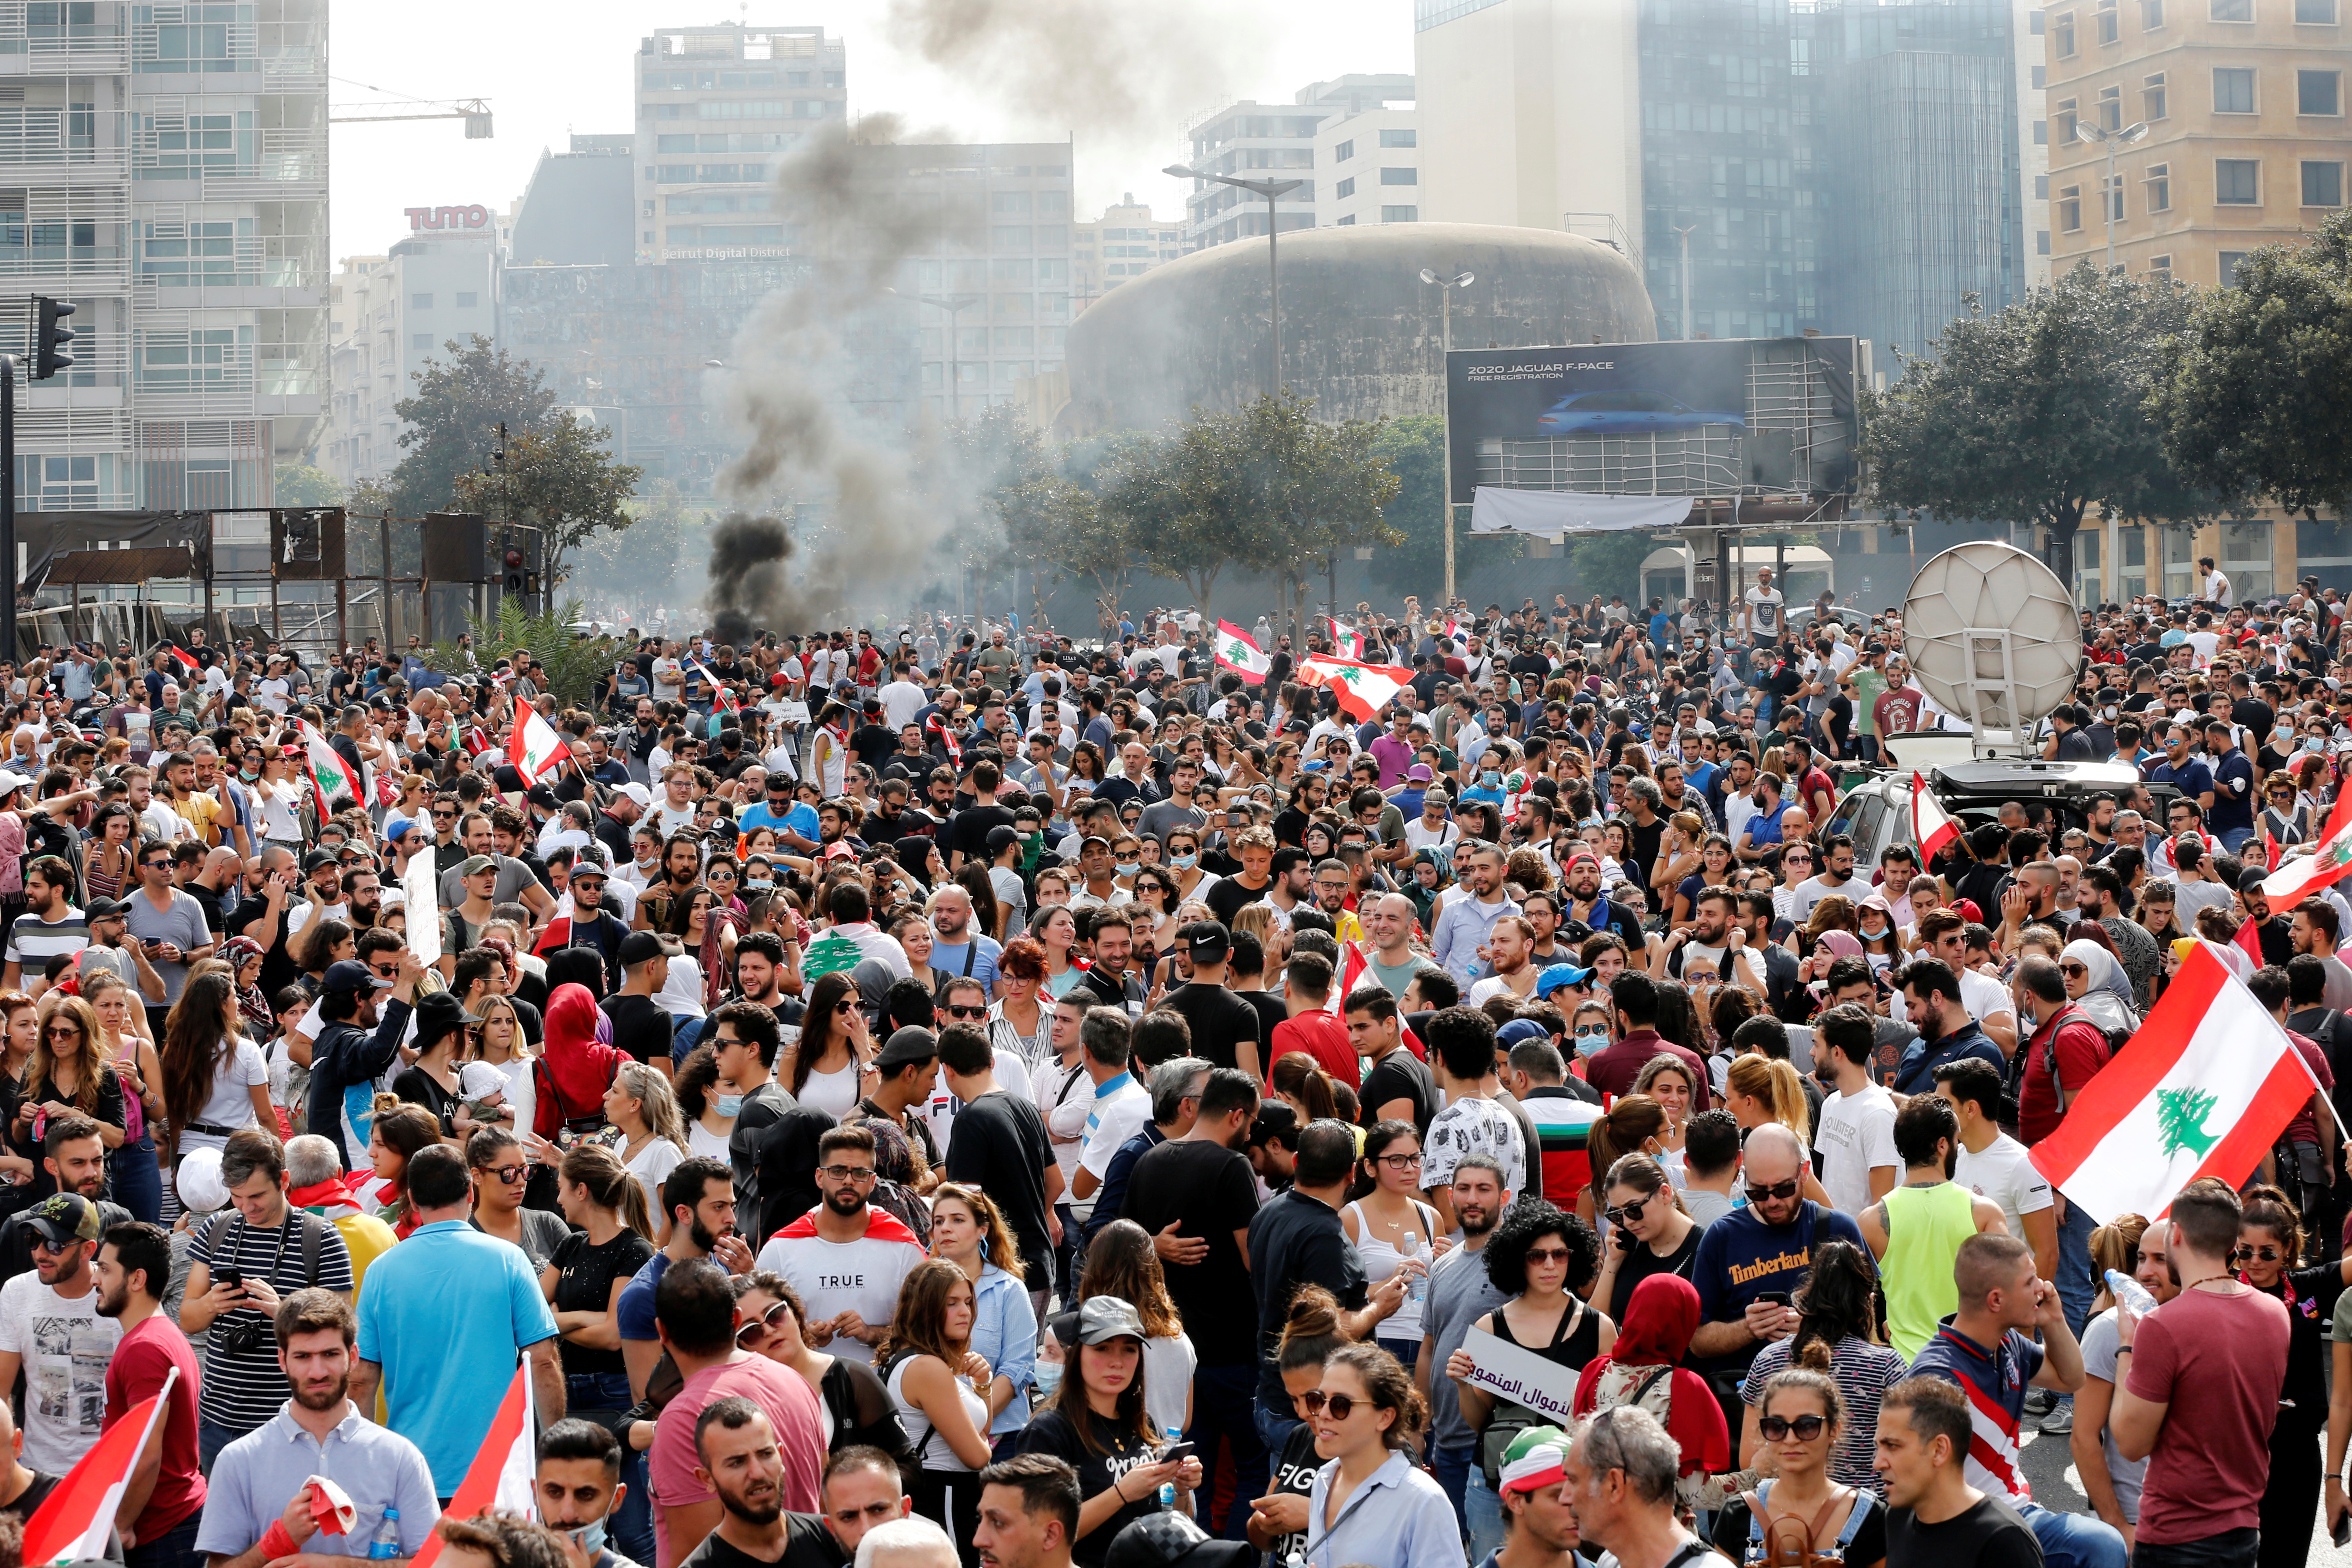 Smoke rises as demonstrators gather during a protest in Beirut over deteriorating economic situation on 18 October (Reuters)